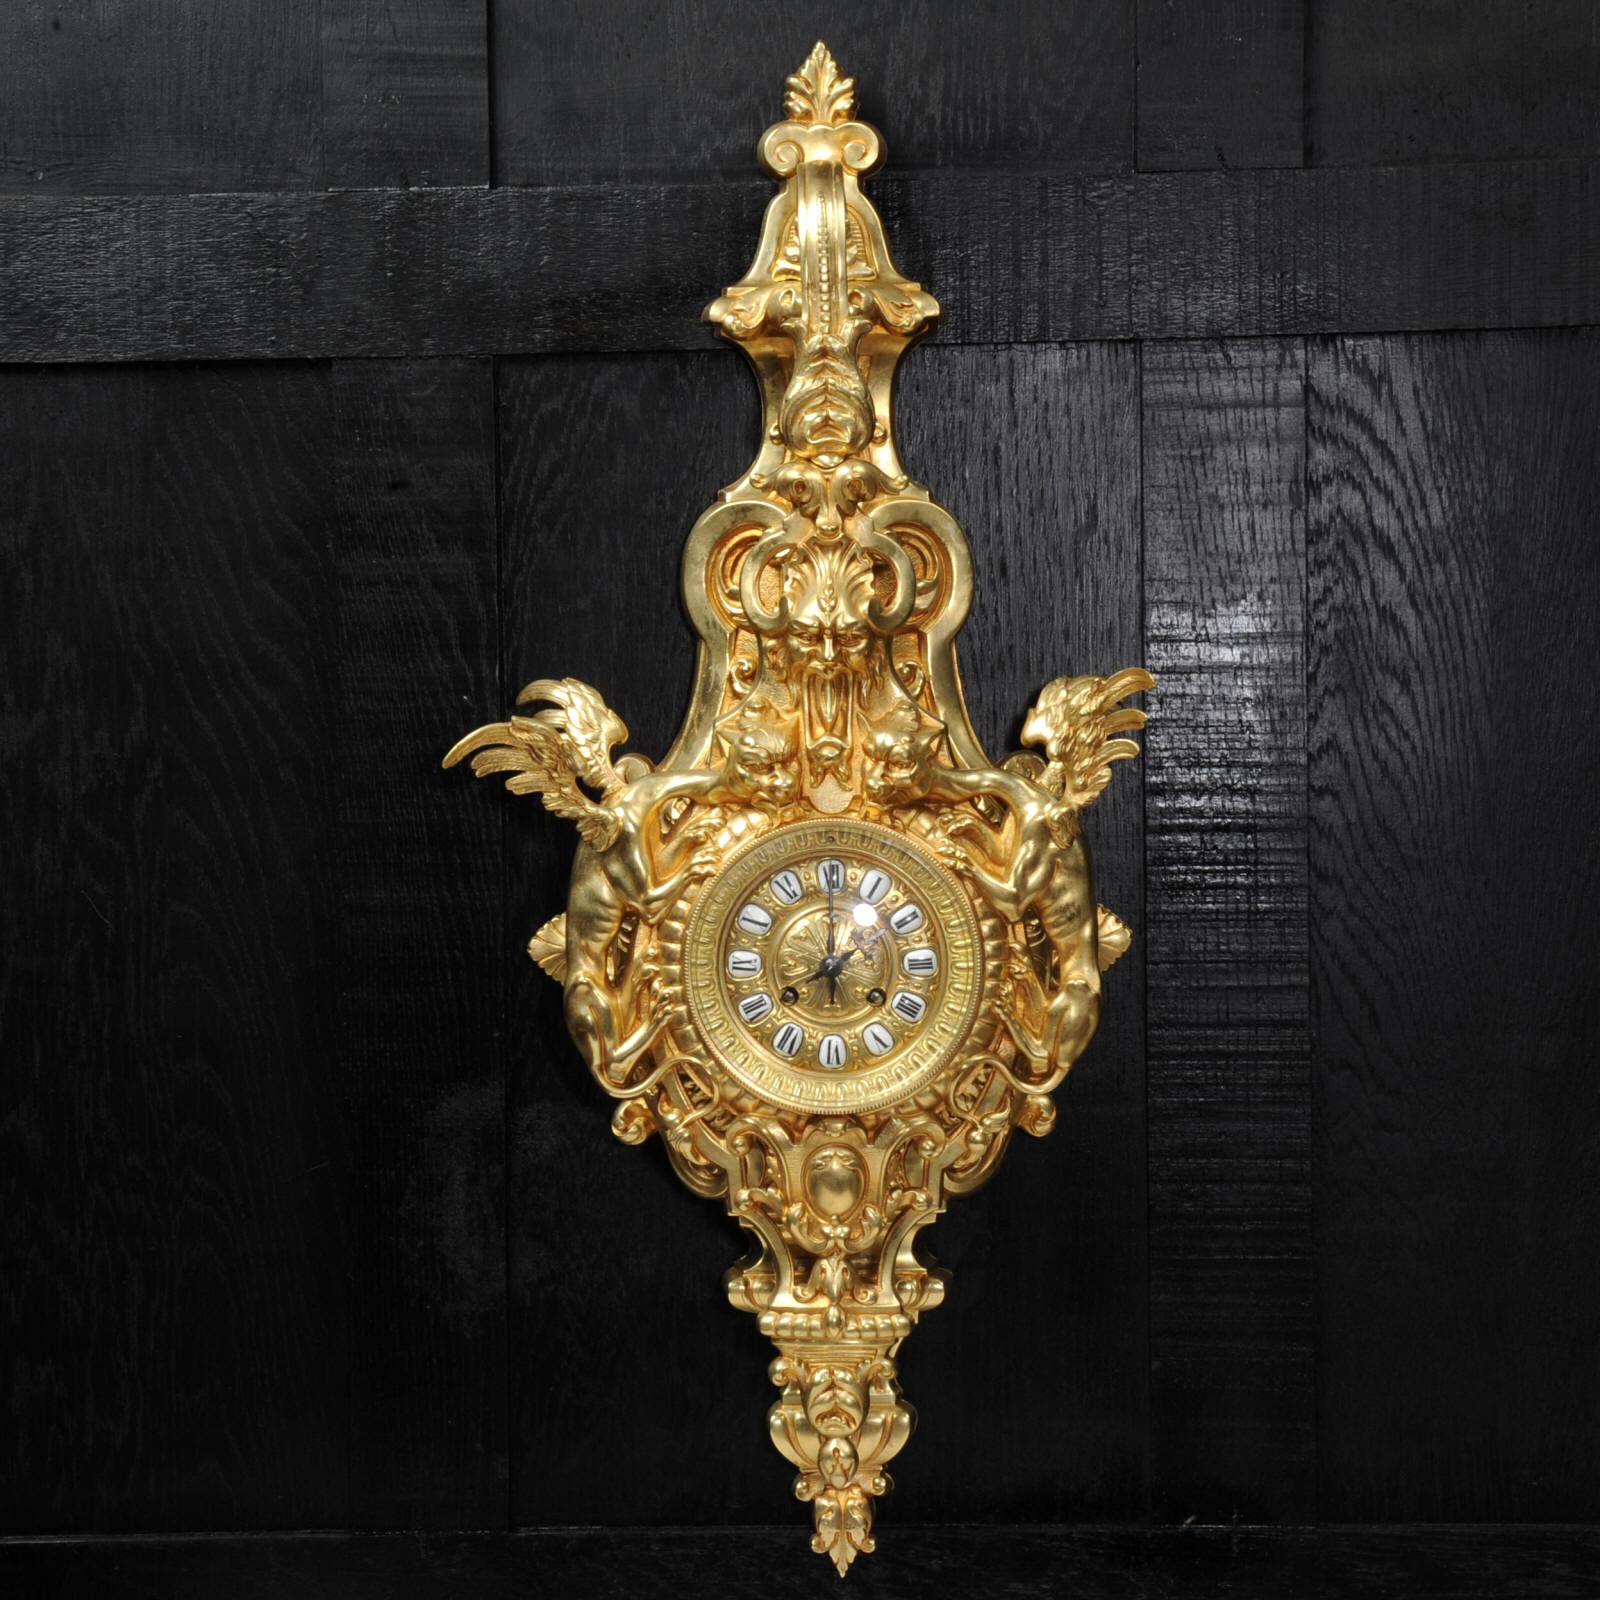 A wonderful and rare Gothic cartel clock, beautifully modelled in gilt bronze dating from around 1870. Chronos the god of time holds the clock from a bracket while the winged hounds of the devil creep up on the clock or time itself. The dial is also